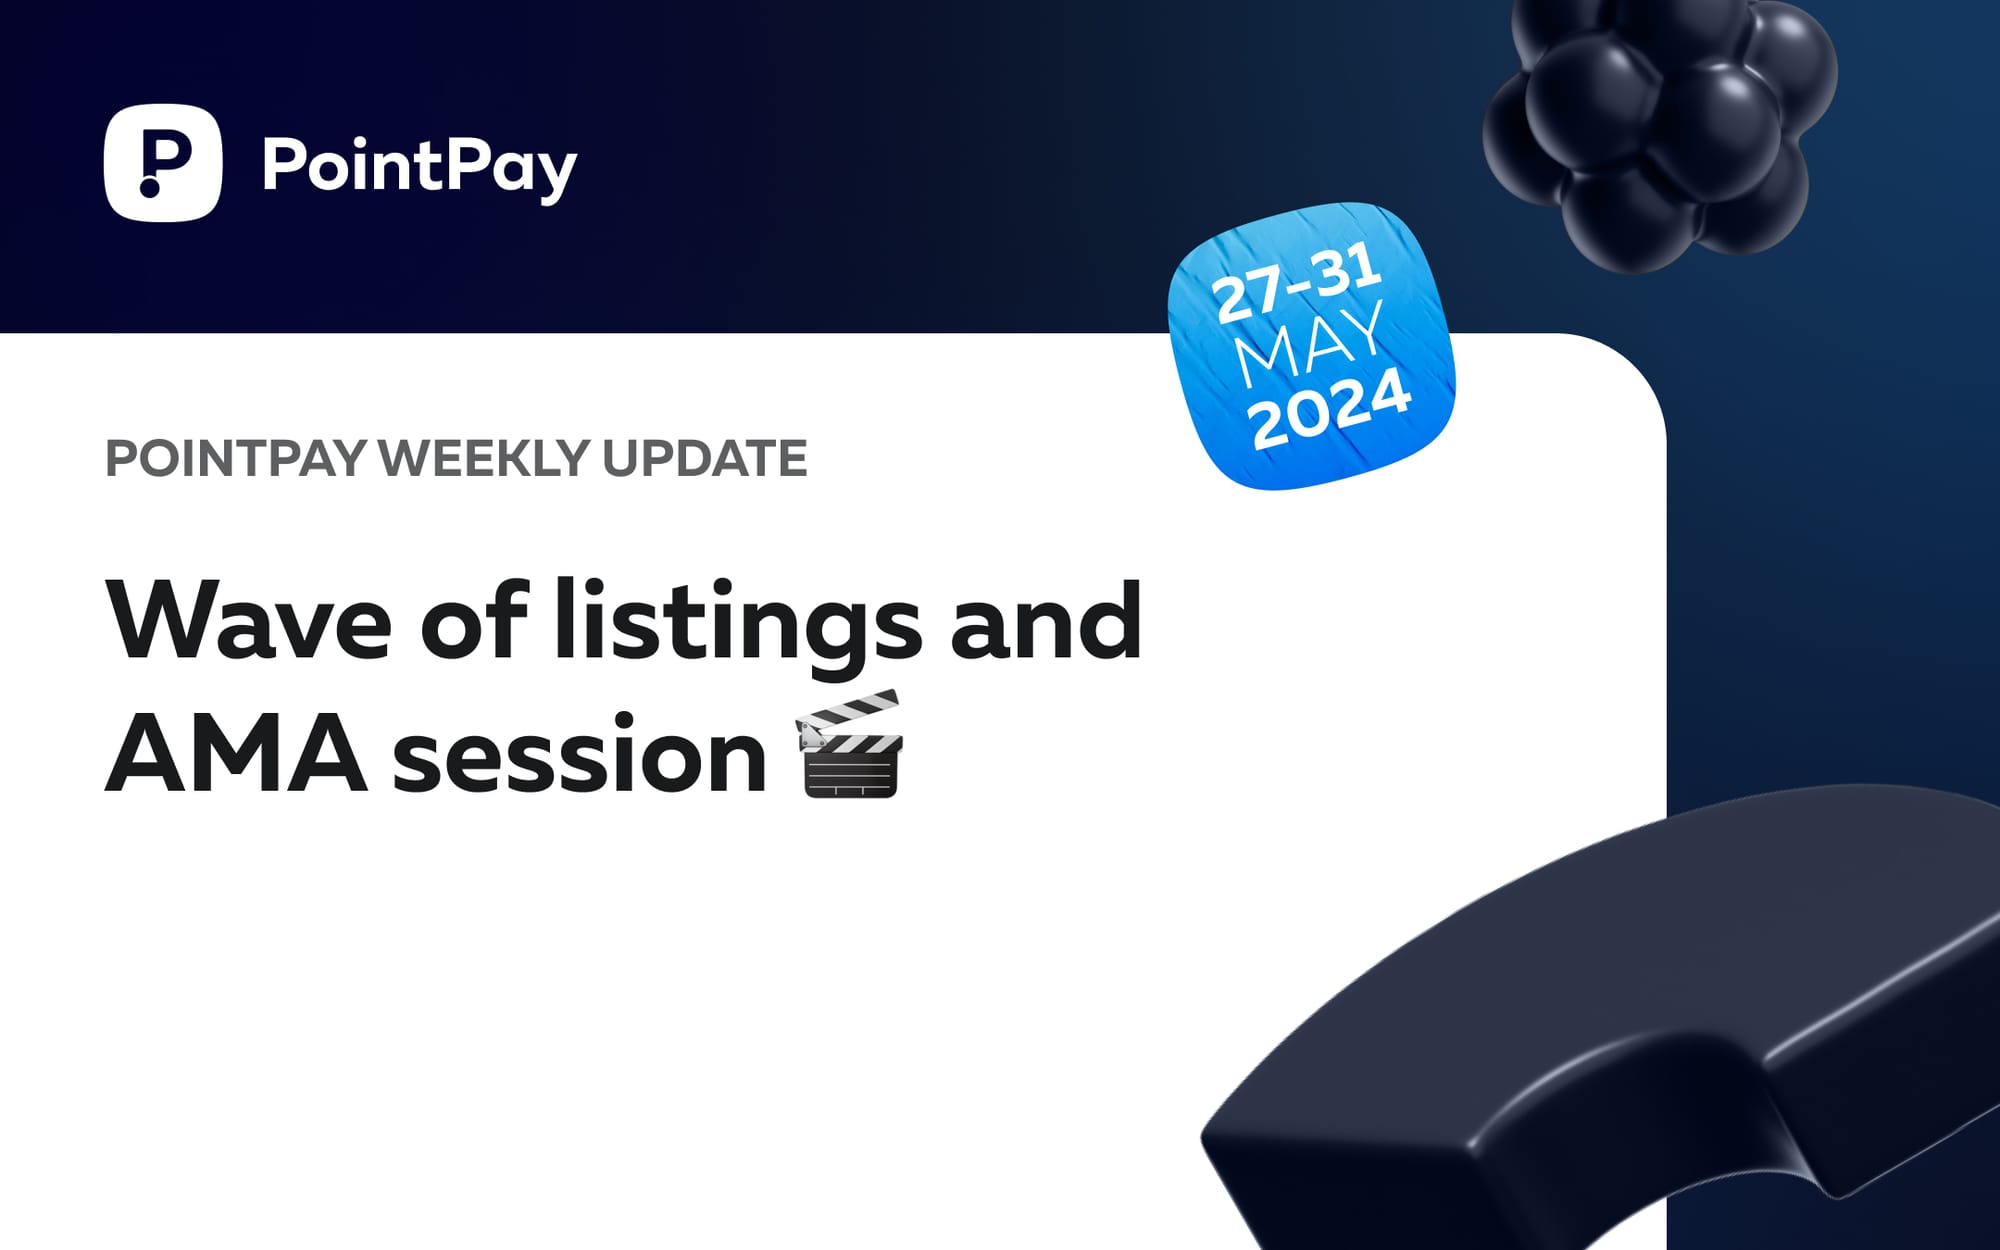 PointPay Weekly Update (27-31 May)